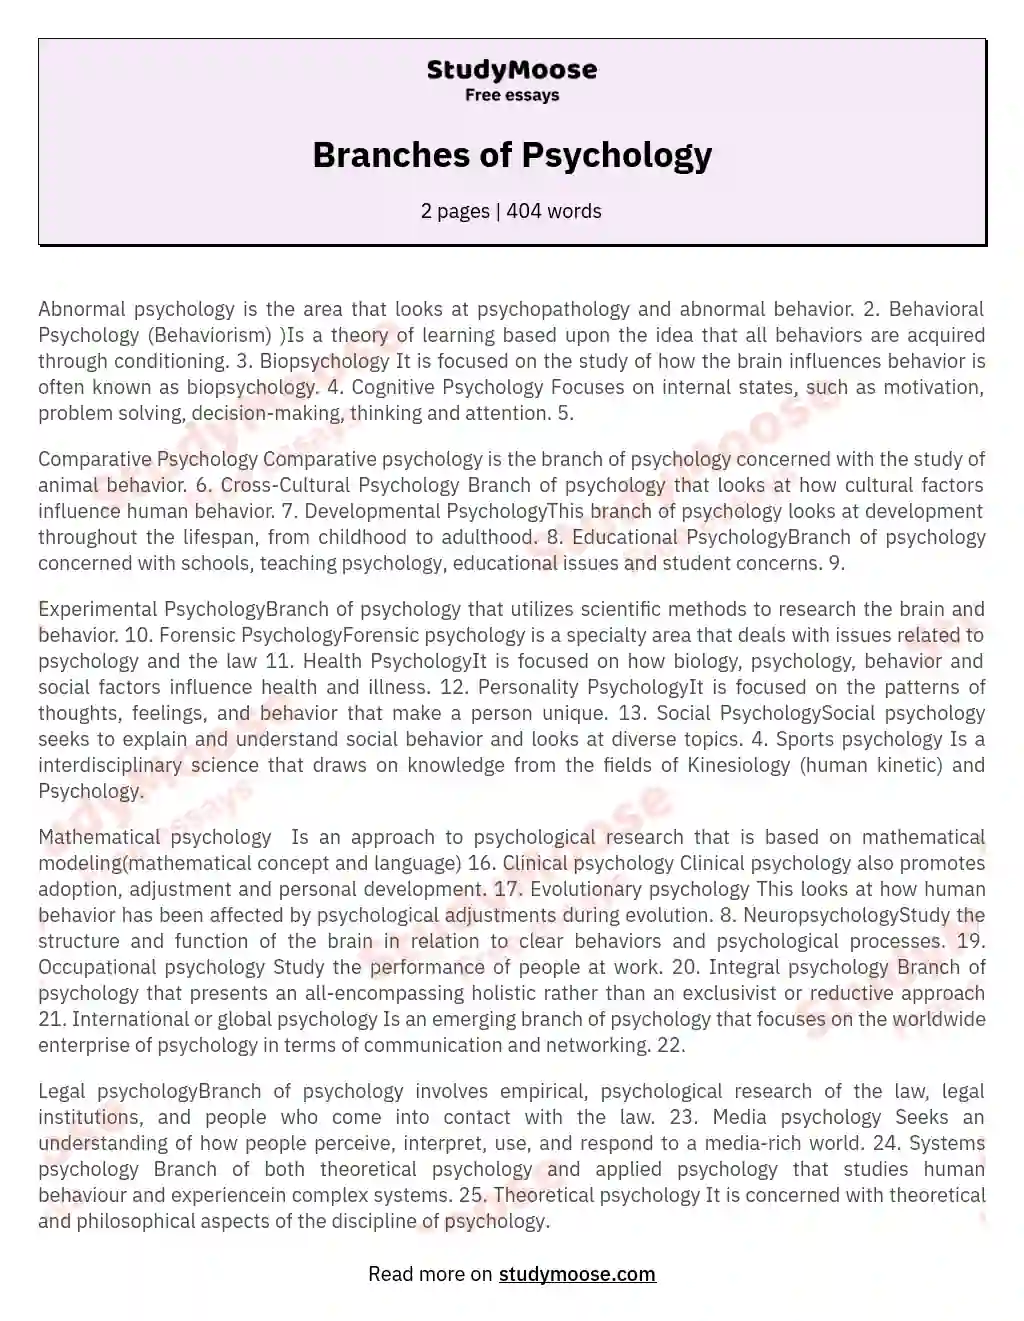 essay on branches of psychology